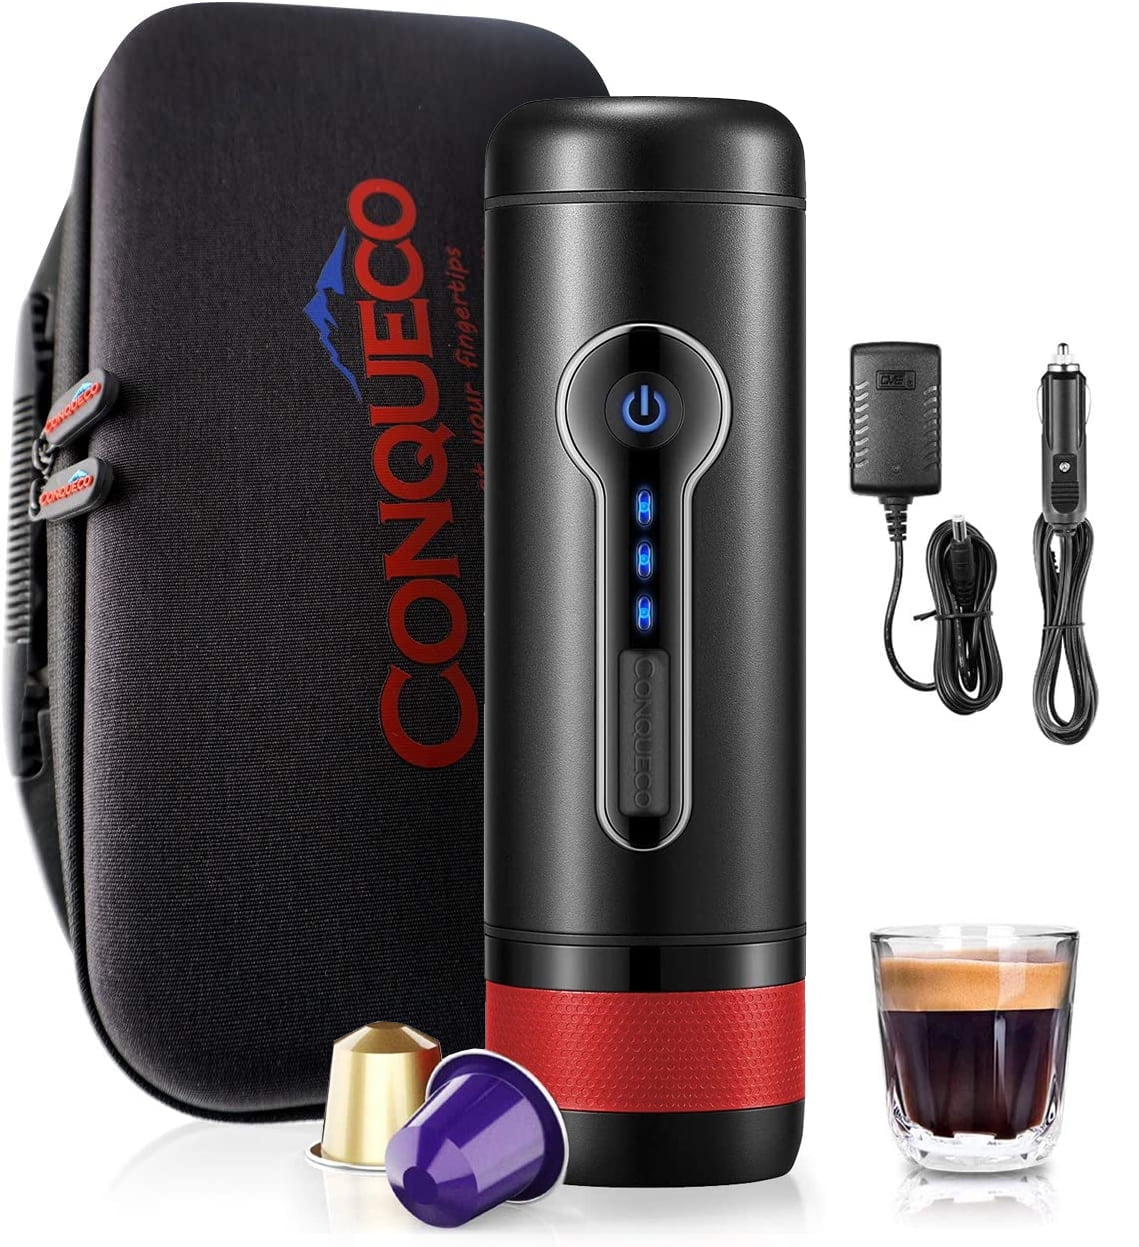 Portable Coffee Machine Espresso Maker: CONQUECO 12V Travel Coffee Machine  with Rechargeable Battery - BPA Free - One Button Operation 15 Bar Pressure  